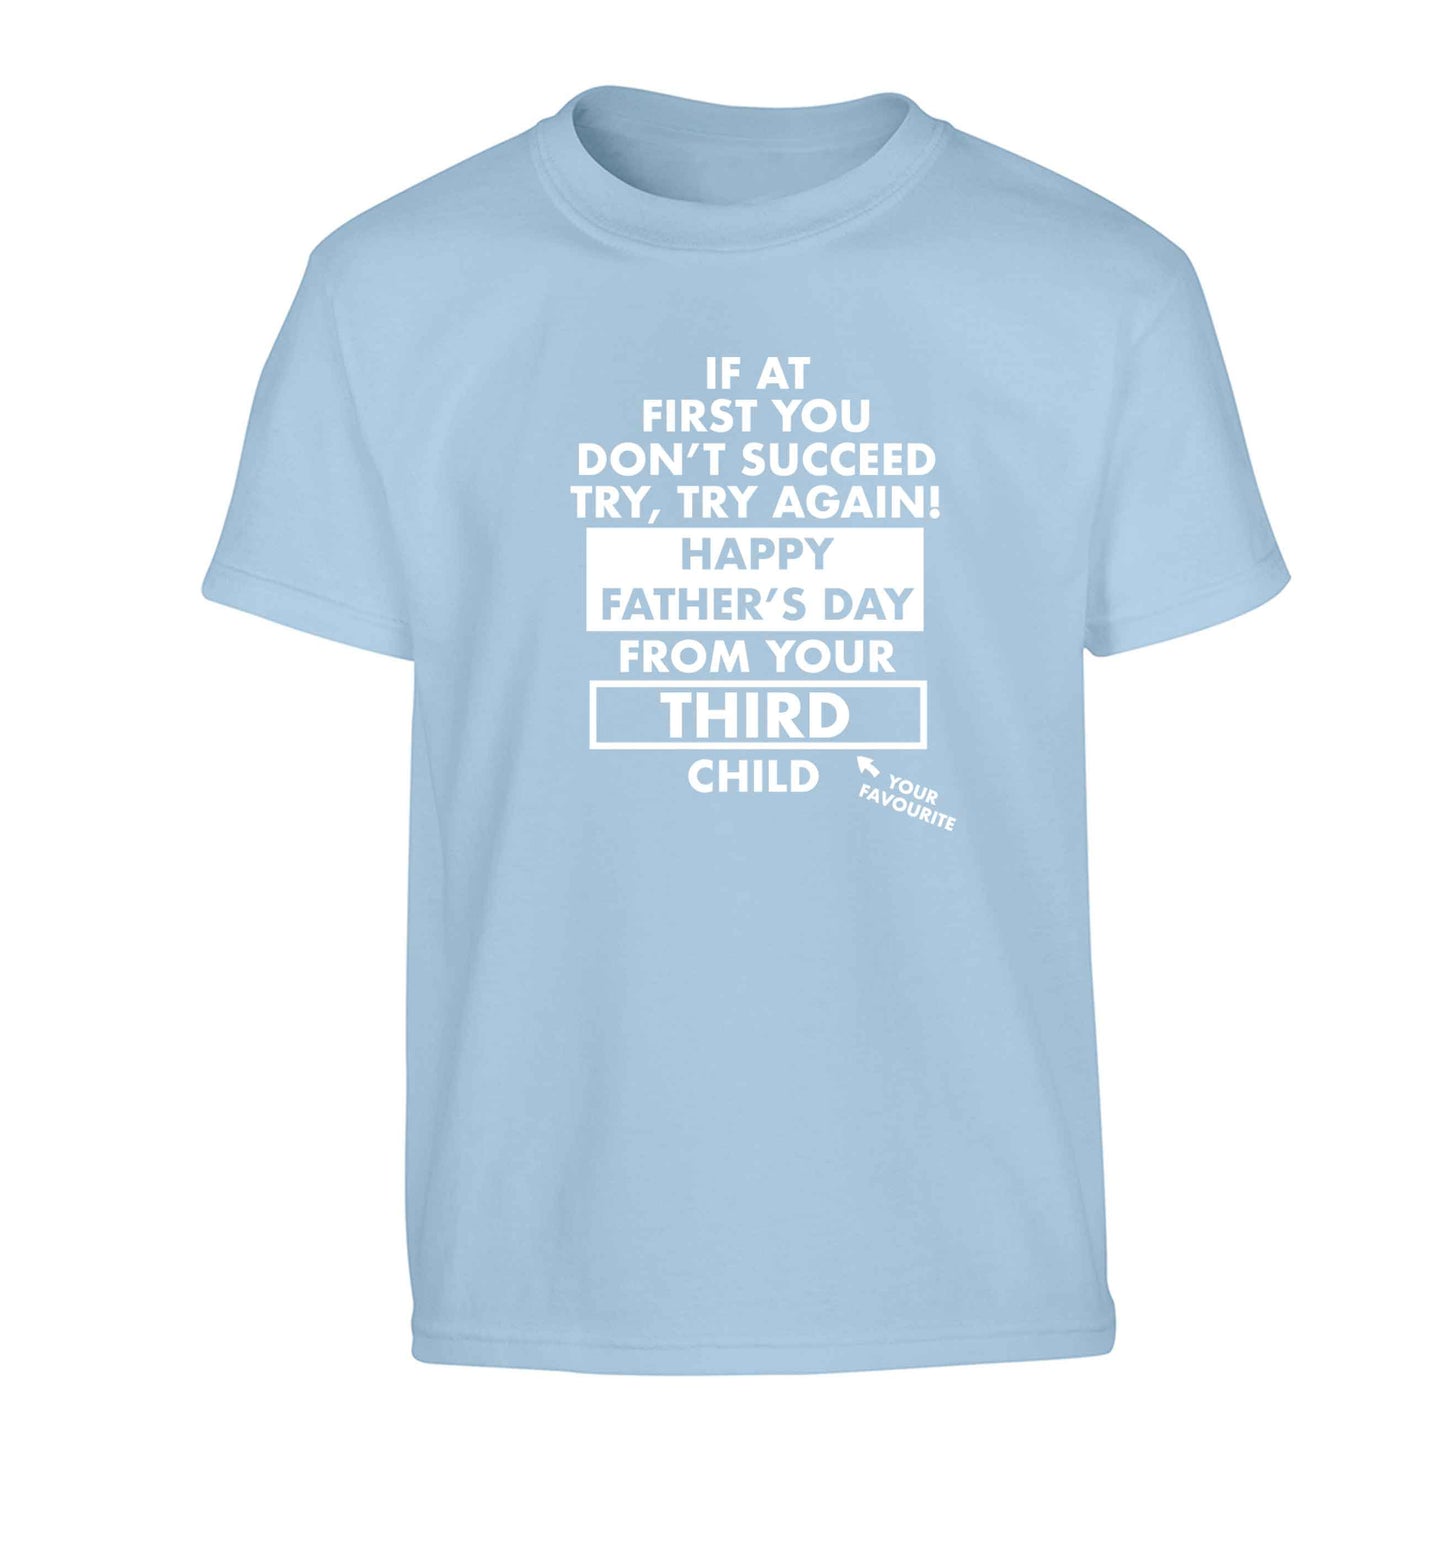 If at first you don't succeed try, try again Happy Father's day from your third child! Children's light blue Tshirt 12-13 Years